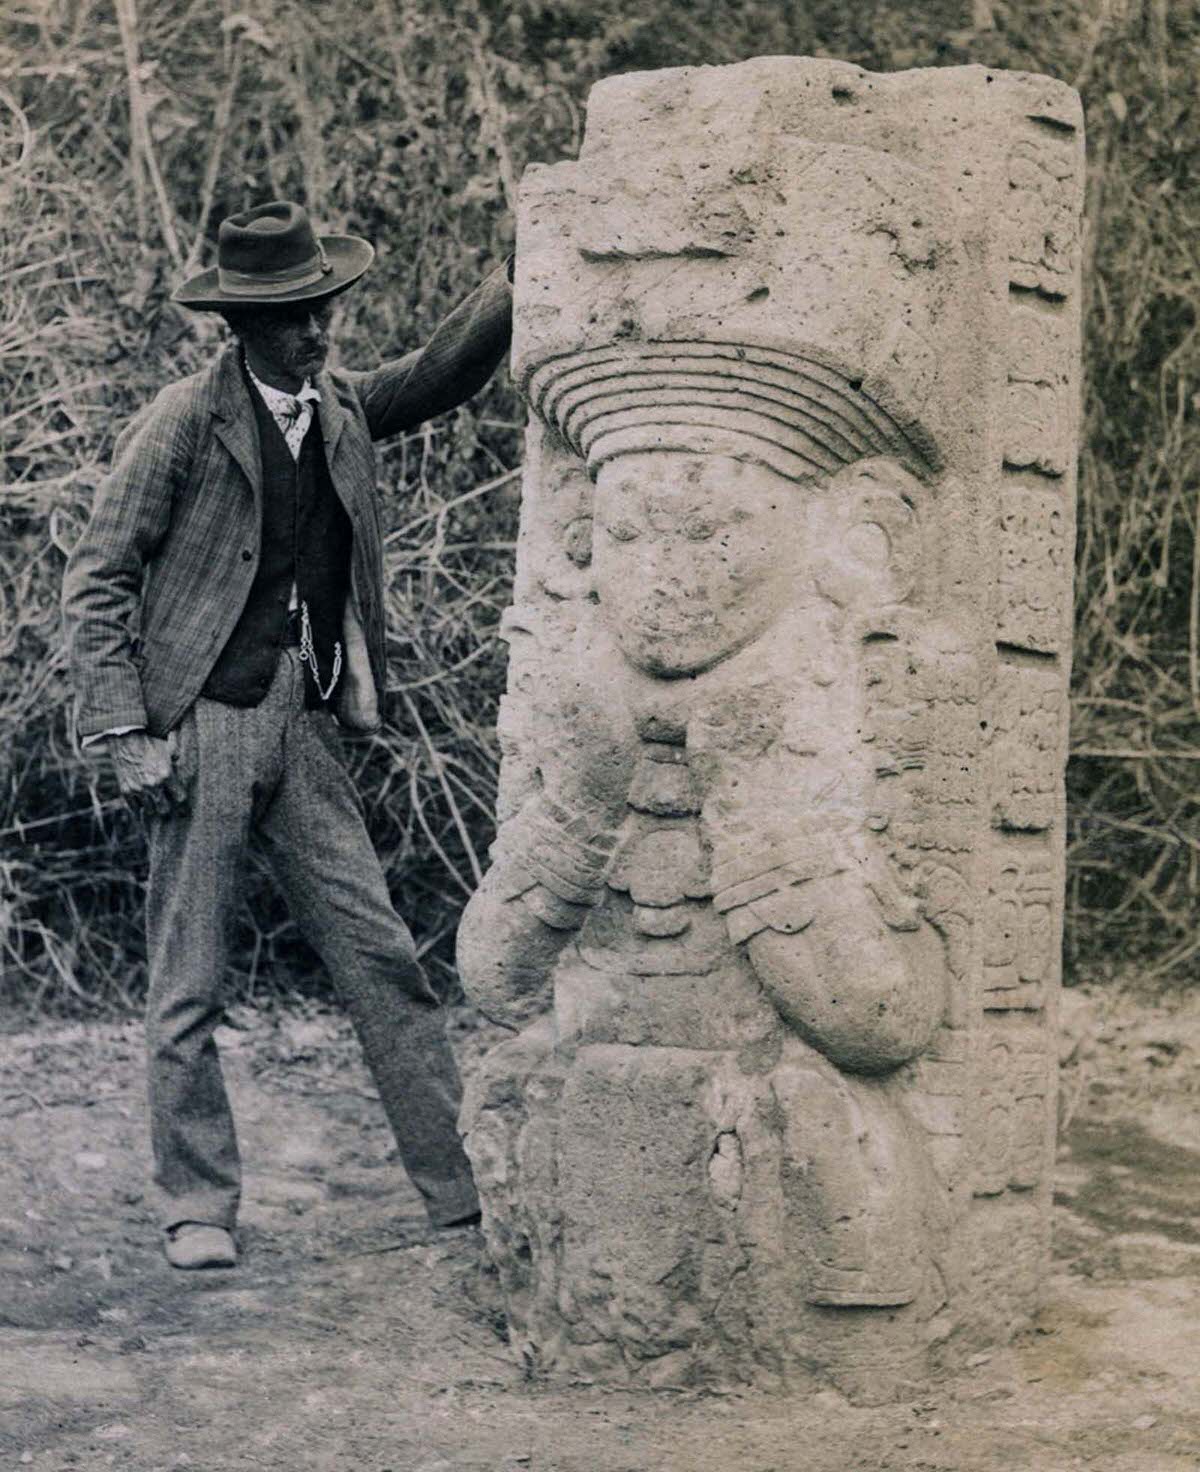 Stela 1 at Copan, Honduras, as found by Alfred P. Maudslay, 1880s. A Honduran man stands next to the stela for scale.